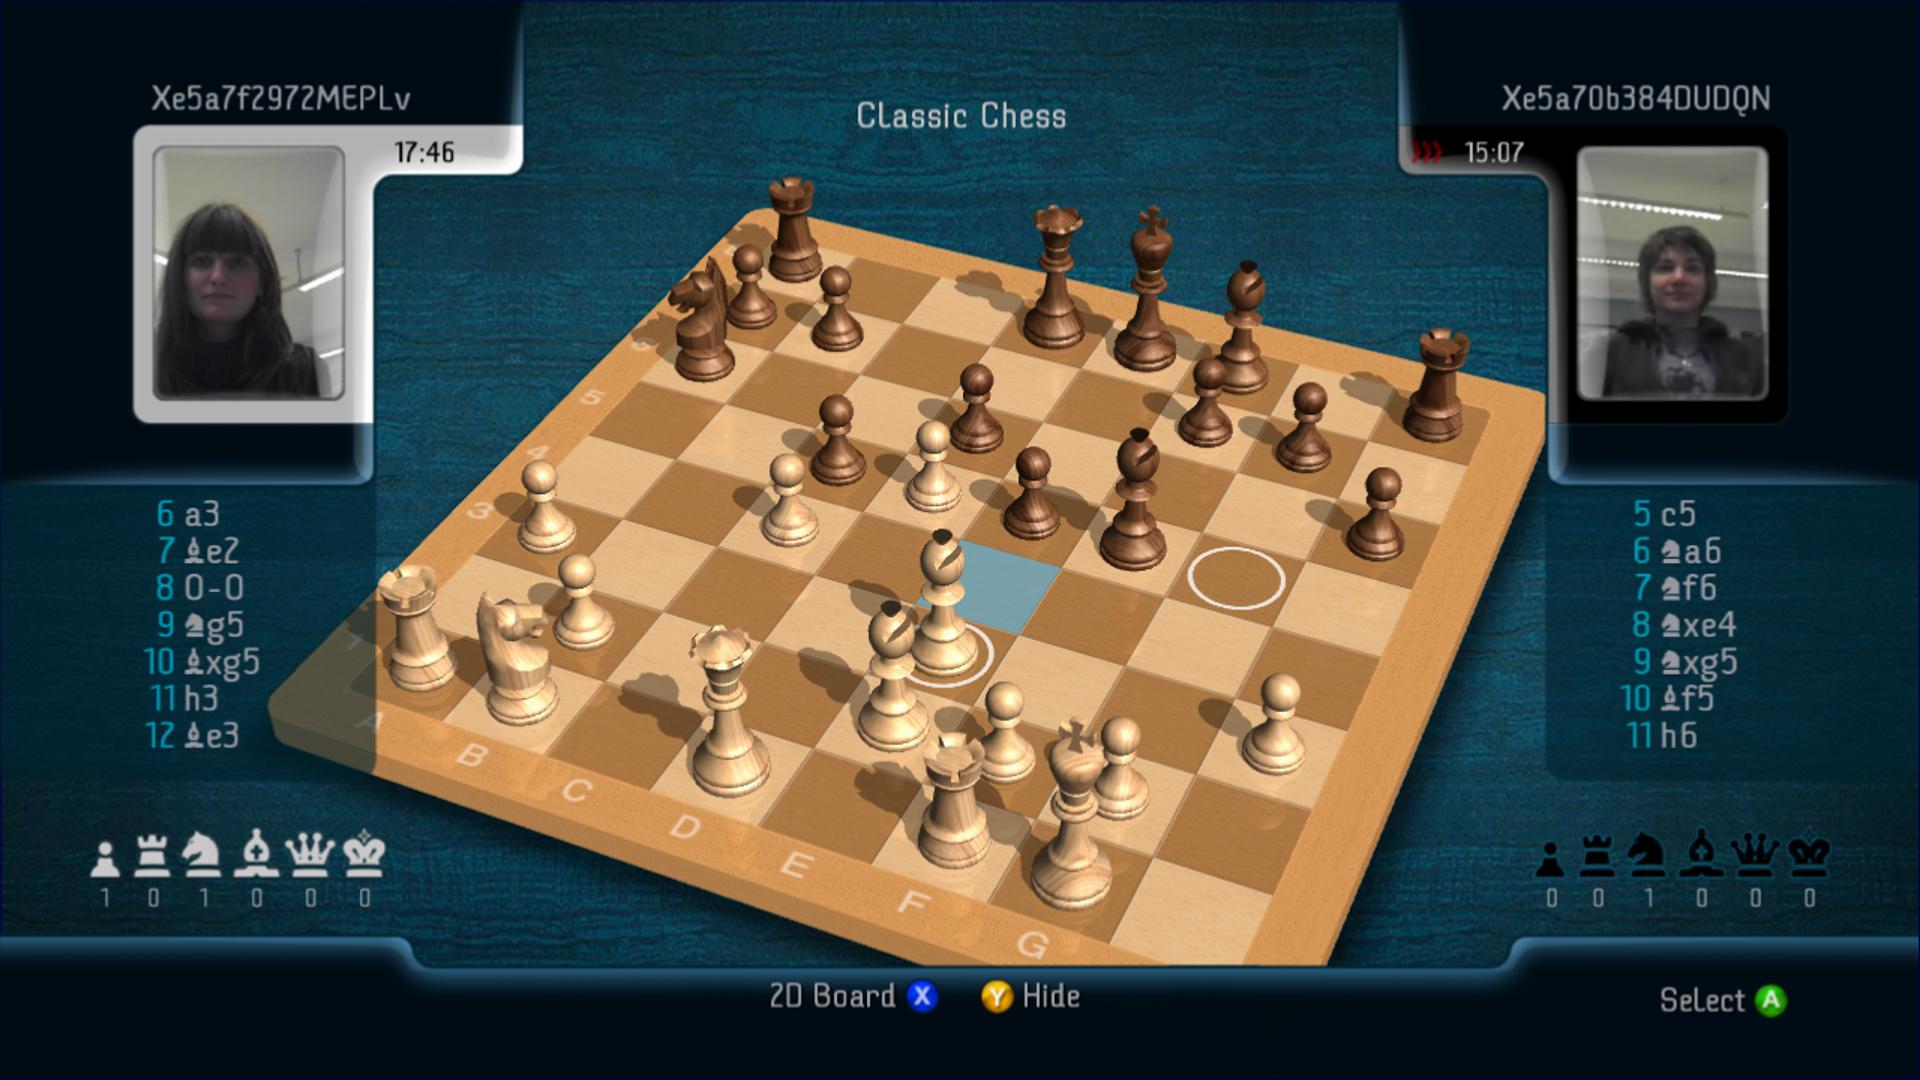 Chessmaster LIVE - Xbox Live Arcade review: Page 2